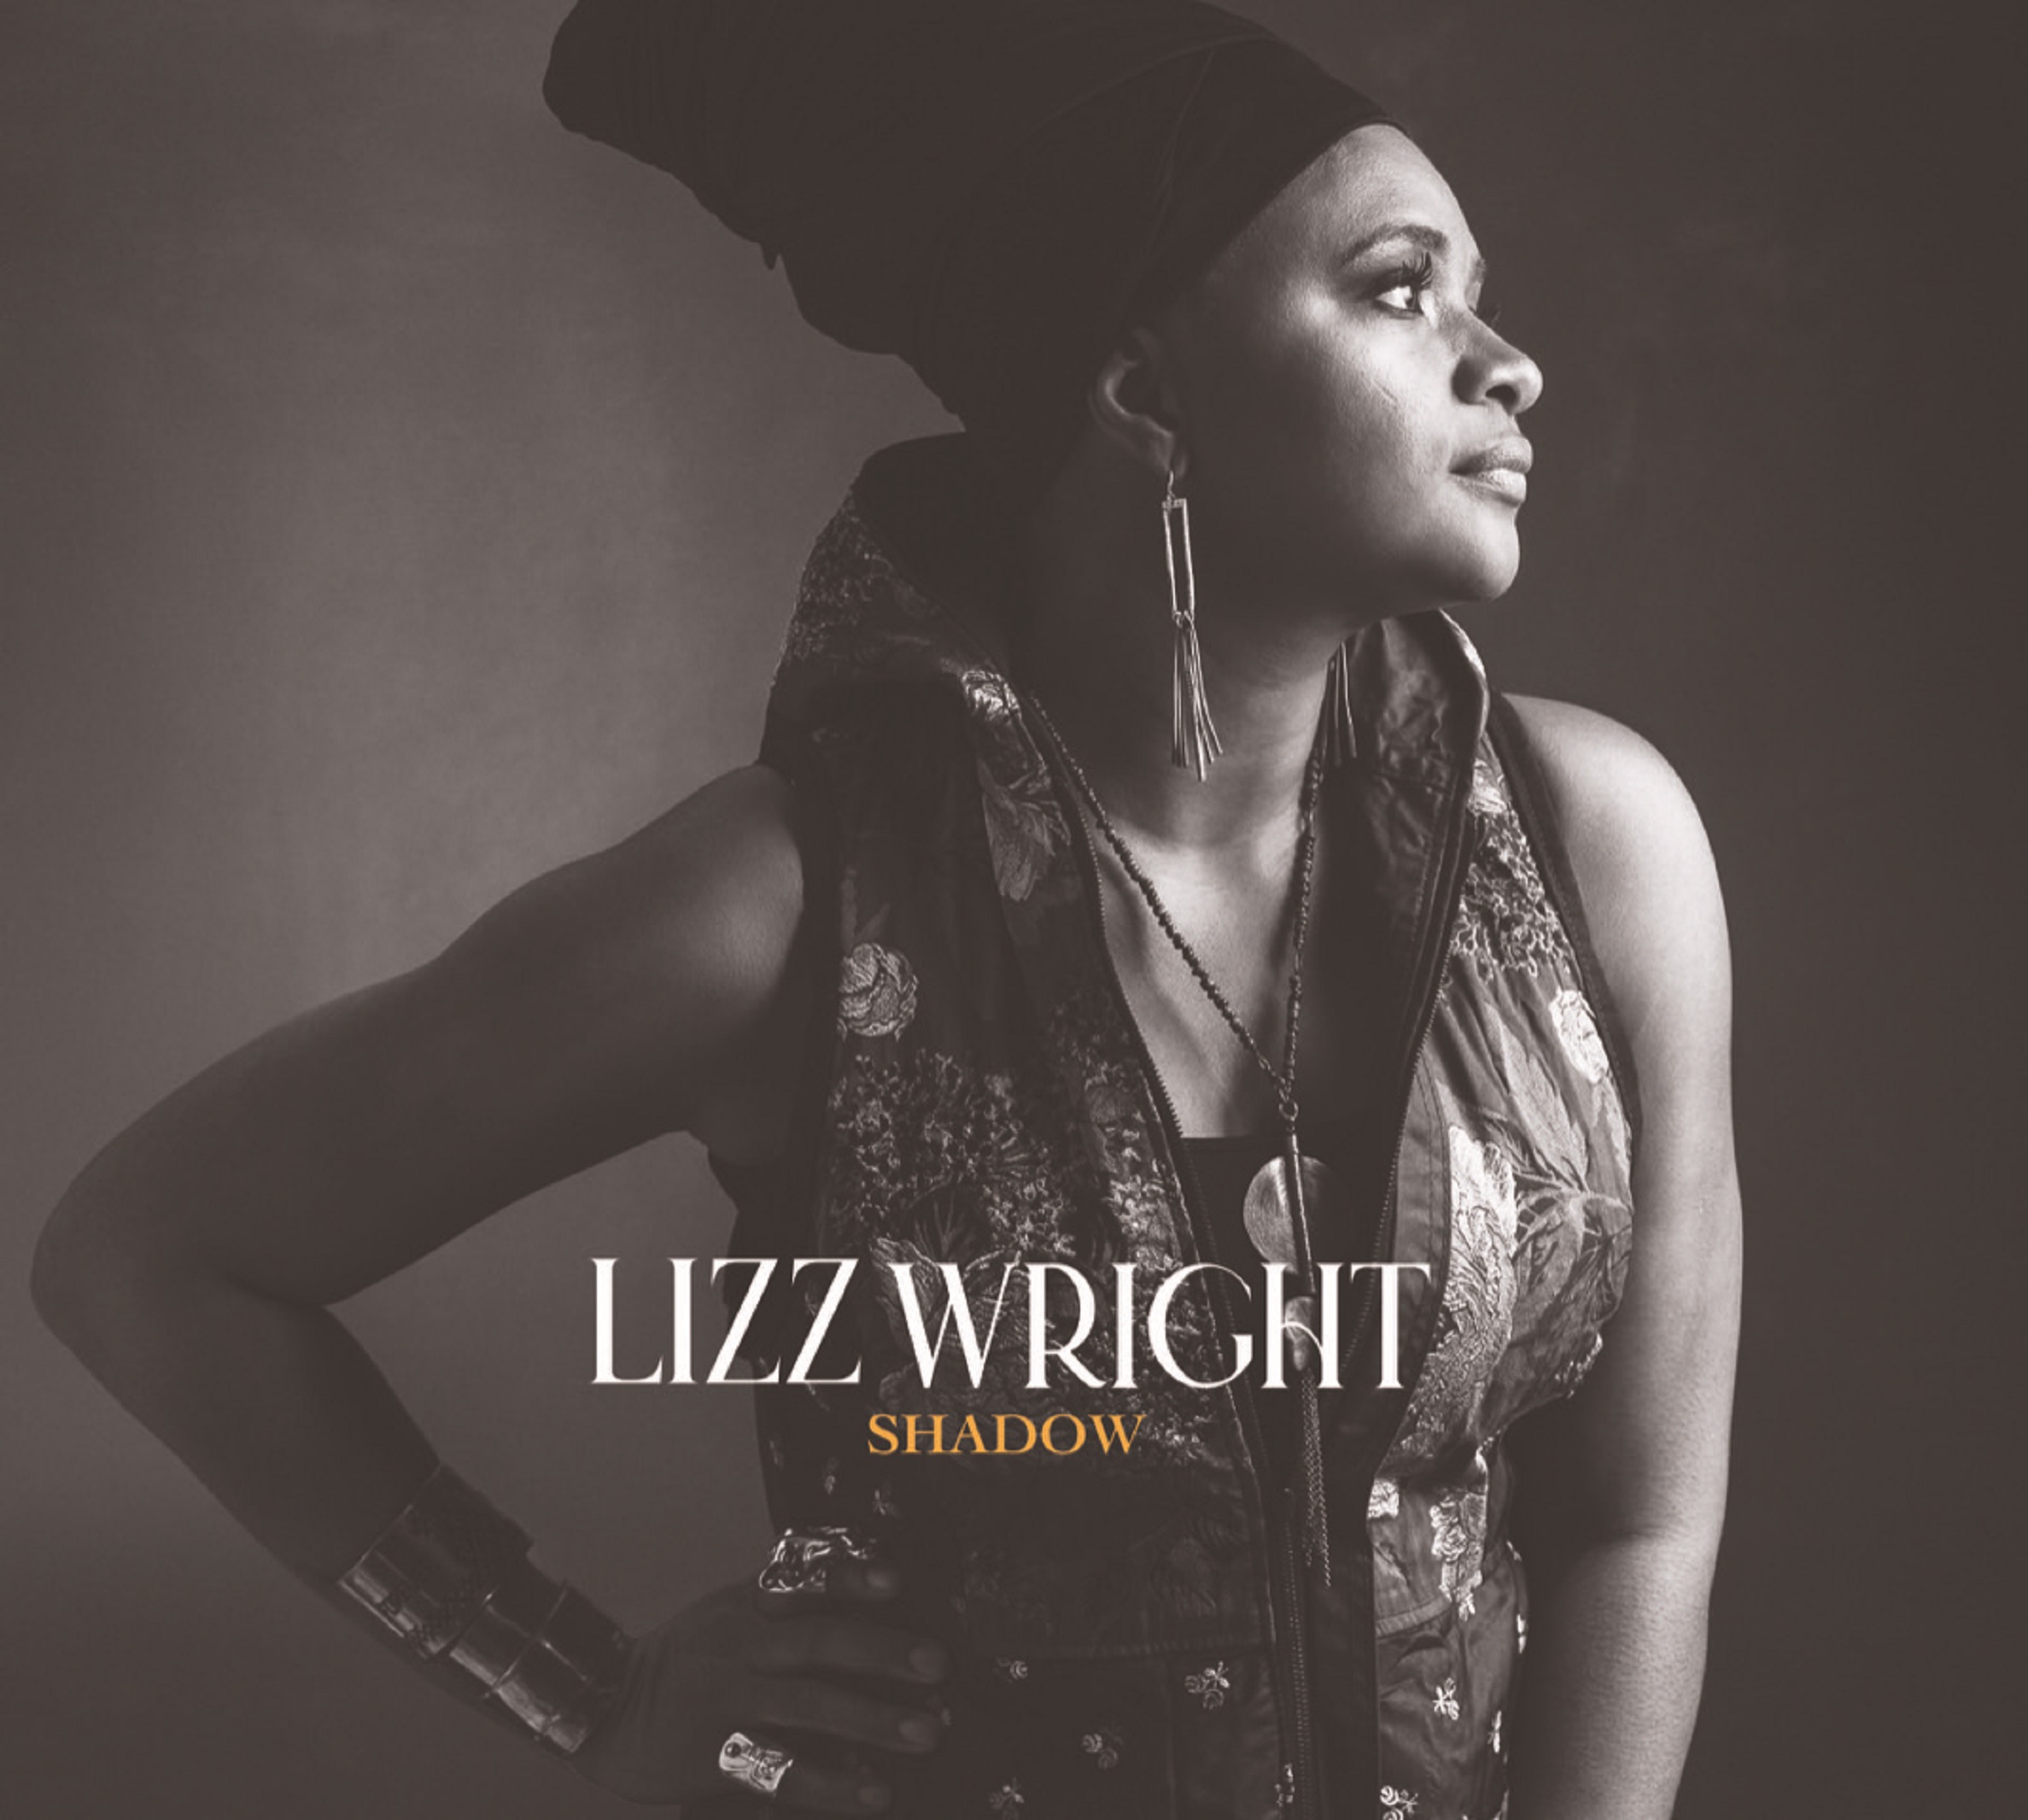 Acclaimed Vocalist Lizz Wright to Release New Single "Your Love" Featuring Meshell Ndegeocello on Feb. 2